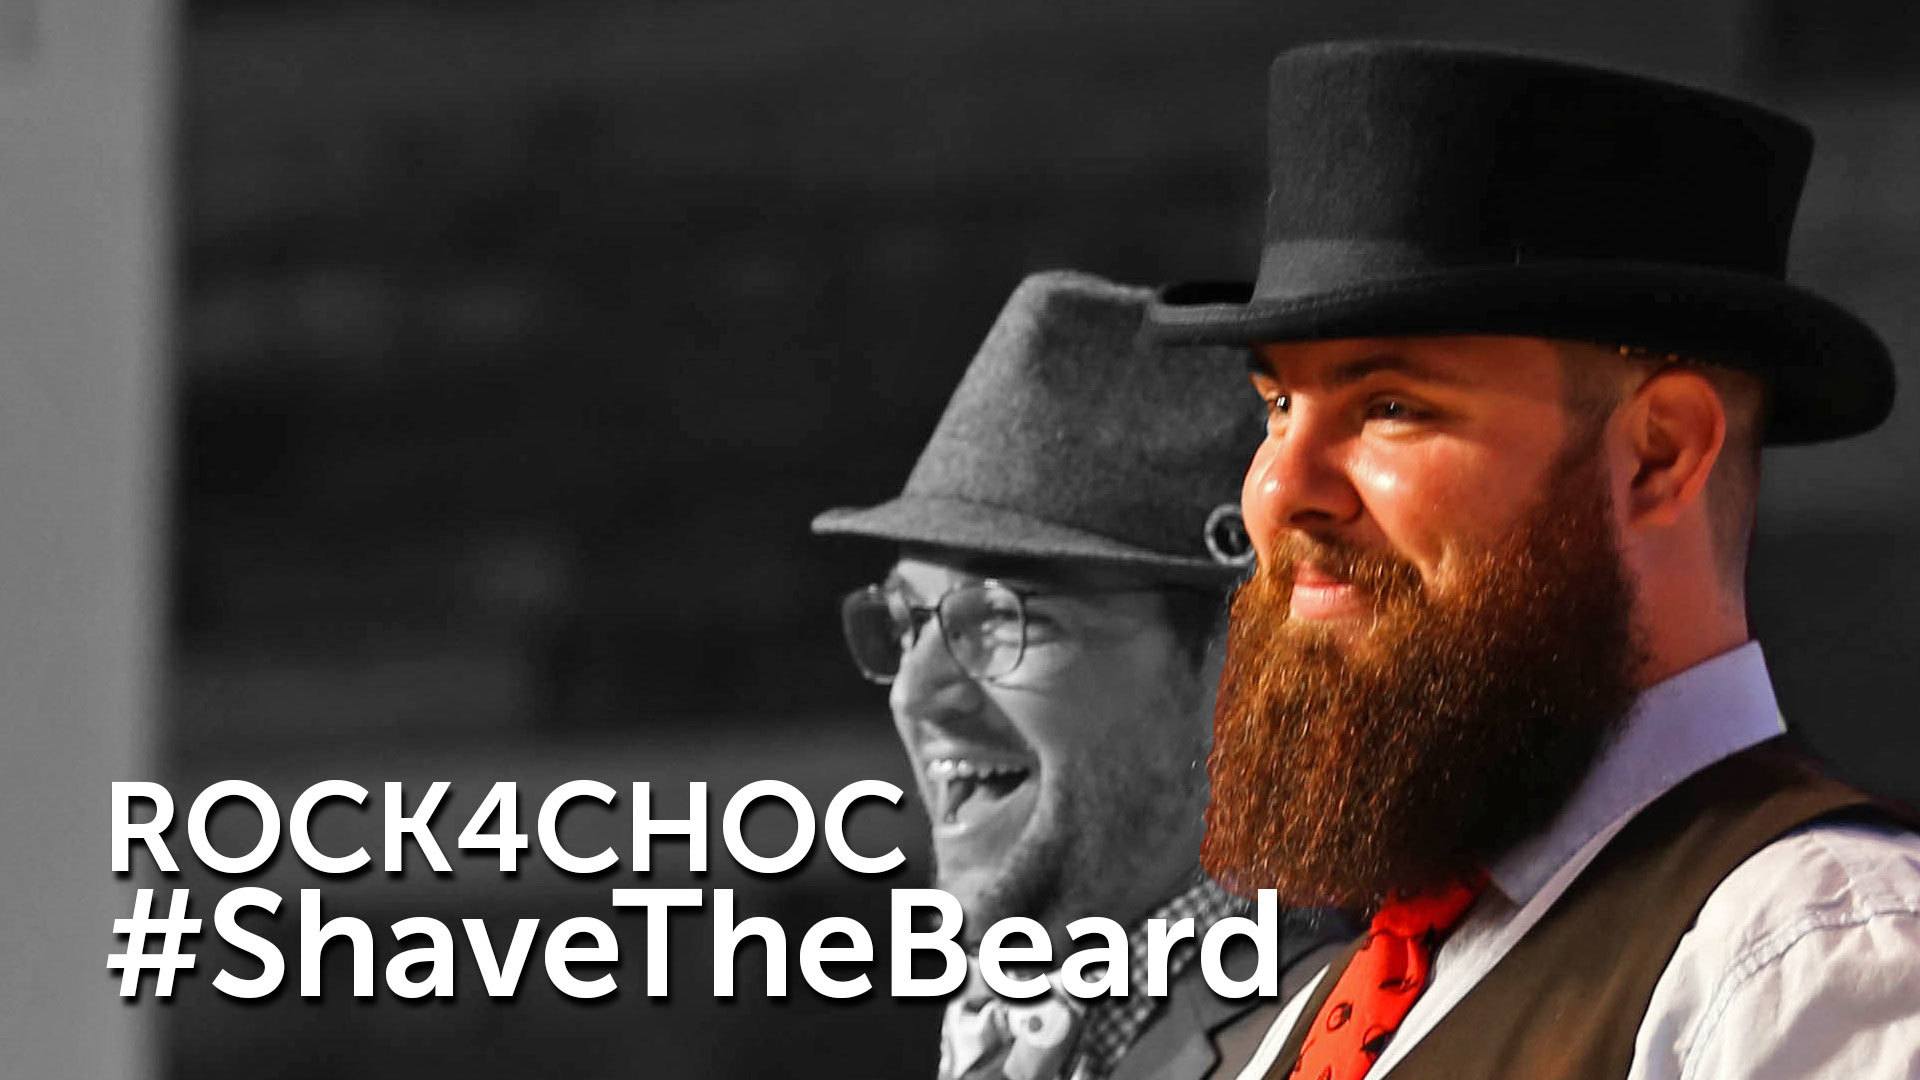 The Beard is Shaved After Successful #ROCK4CHOC Raises Money for CHOC Walk in the Park!